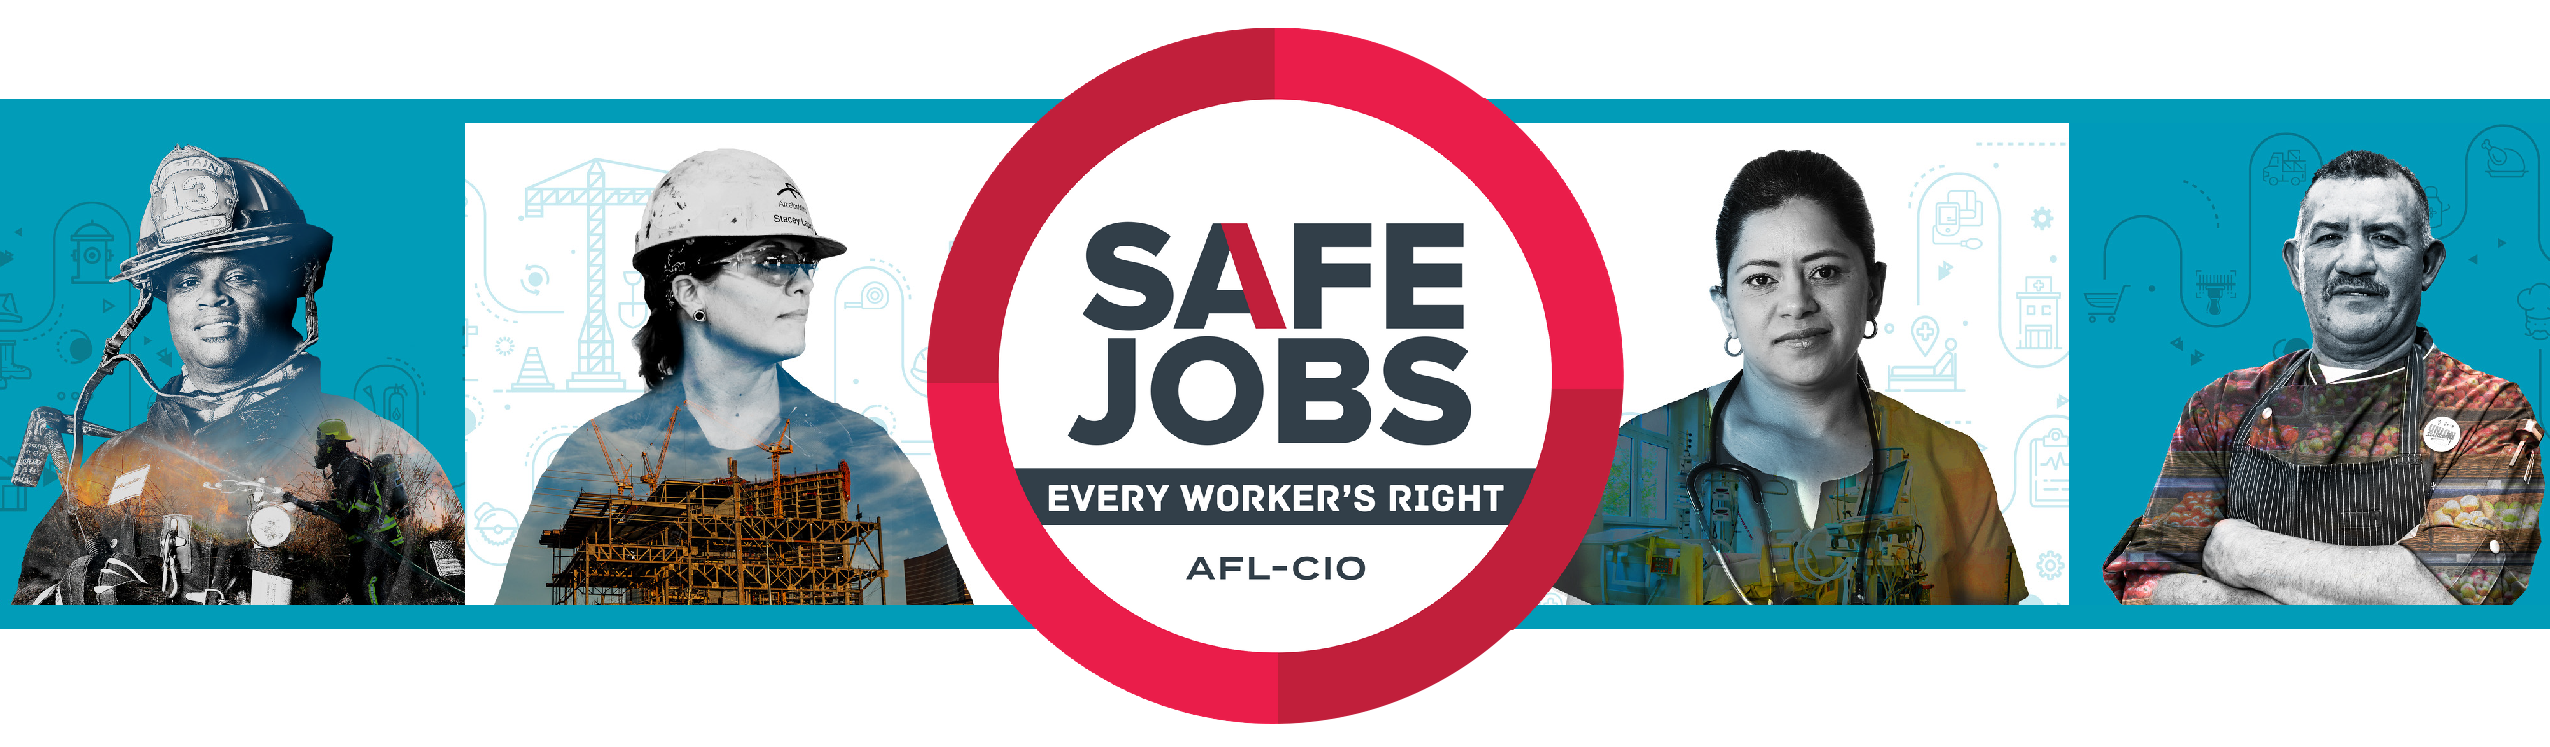 Safe workers